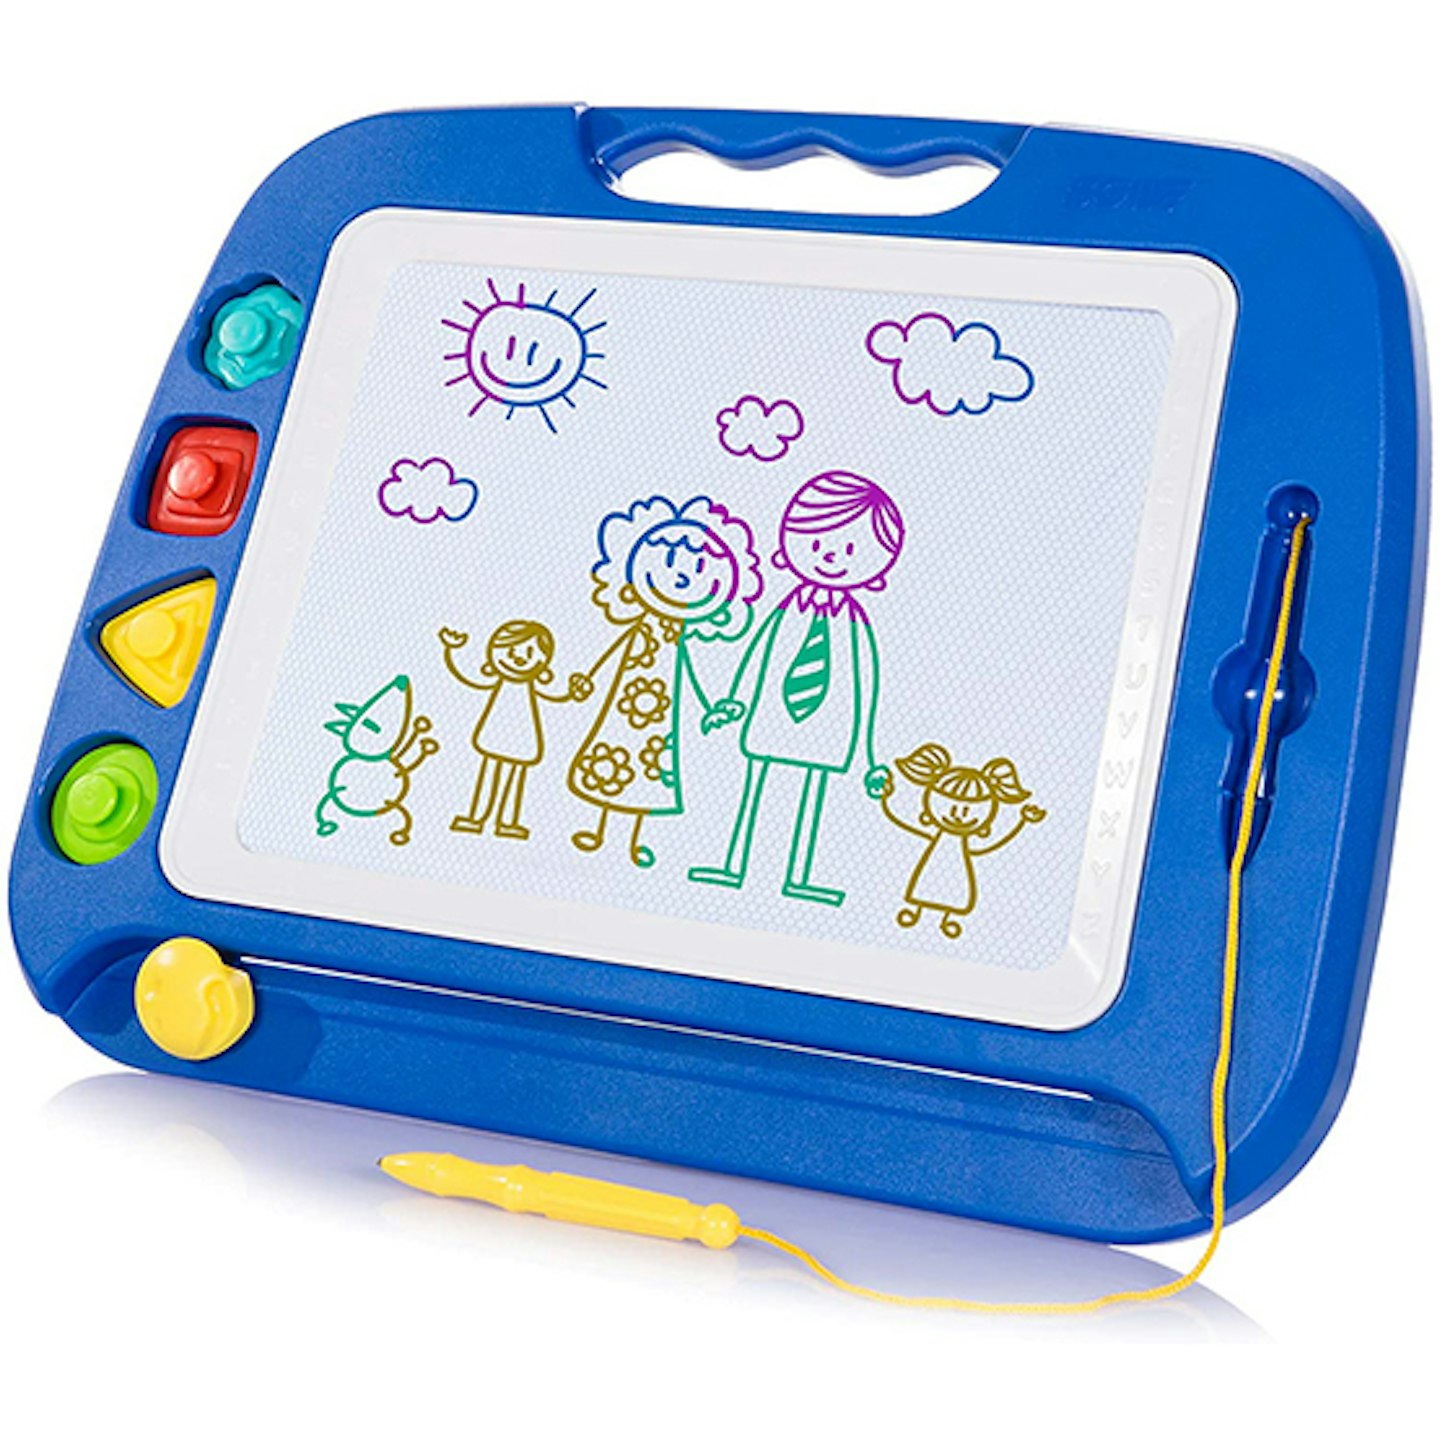 Drawing - Babies and toddlers - Educatall